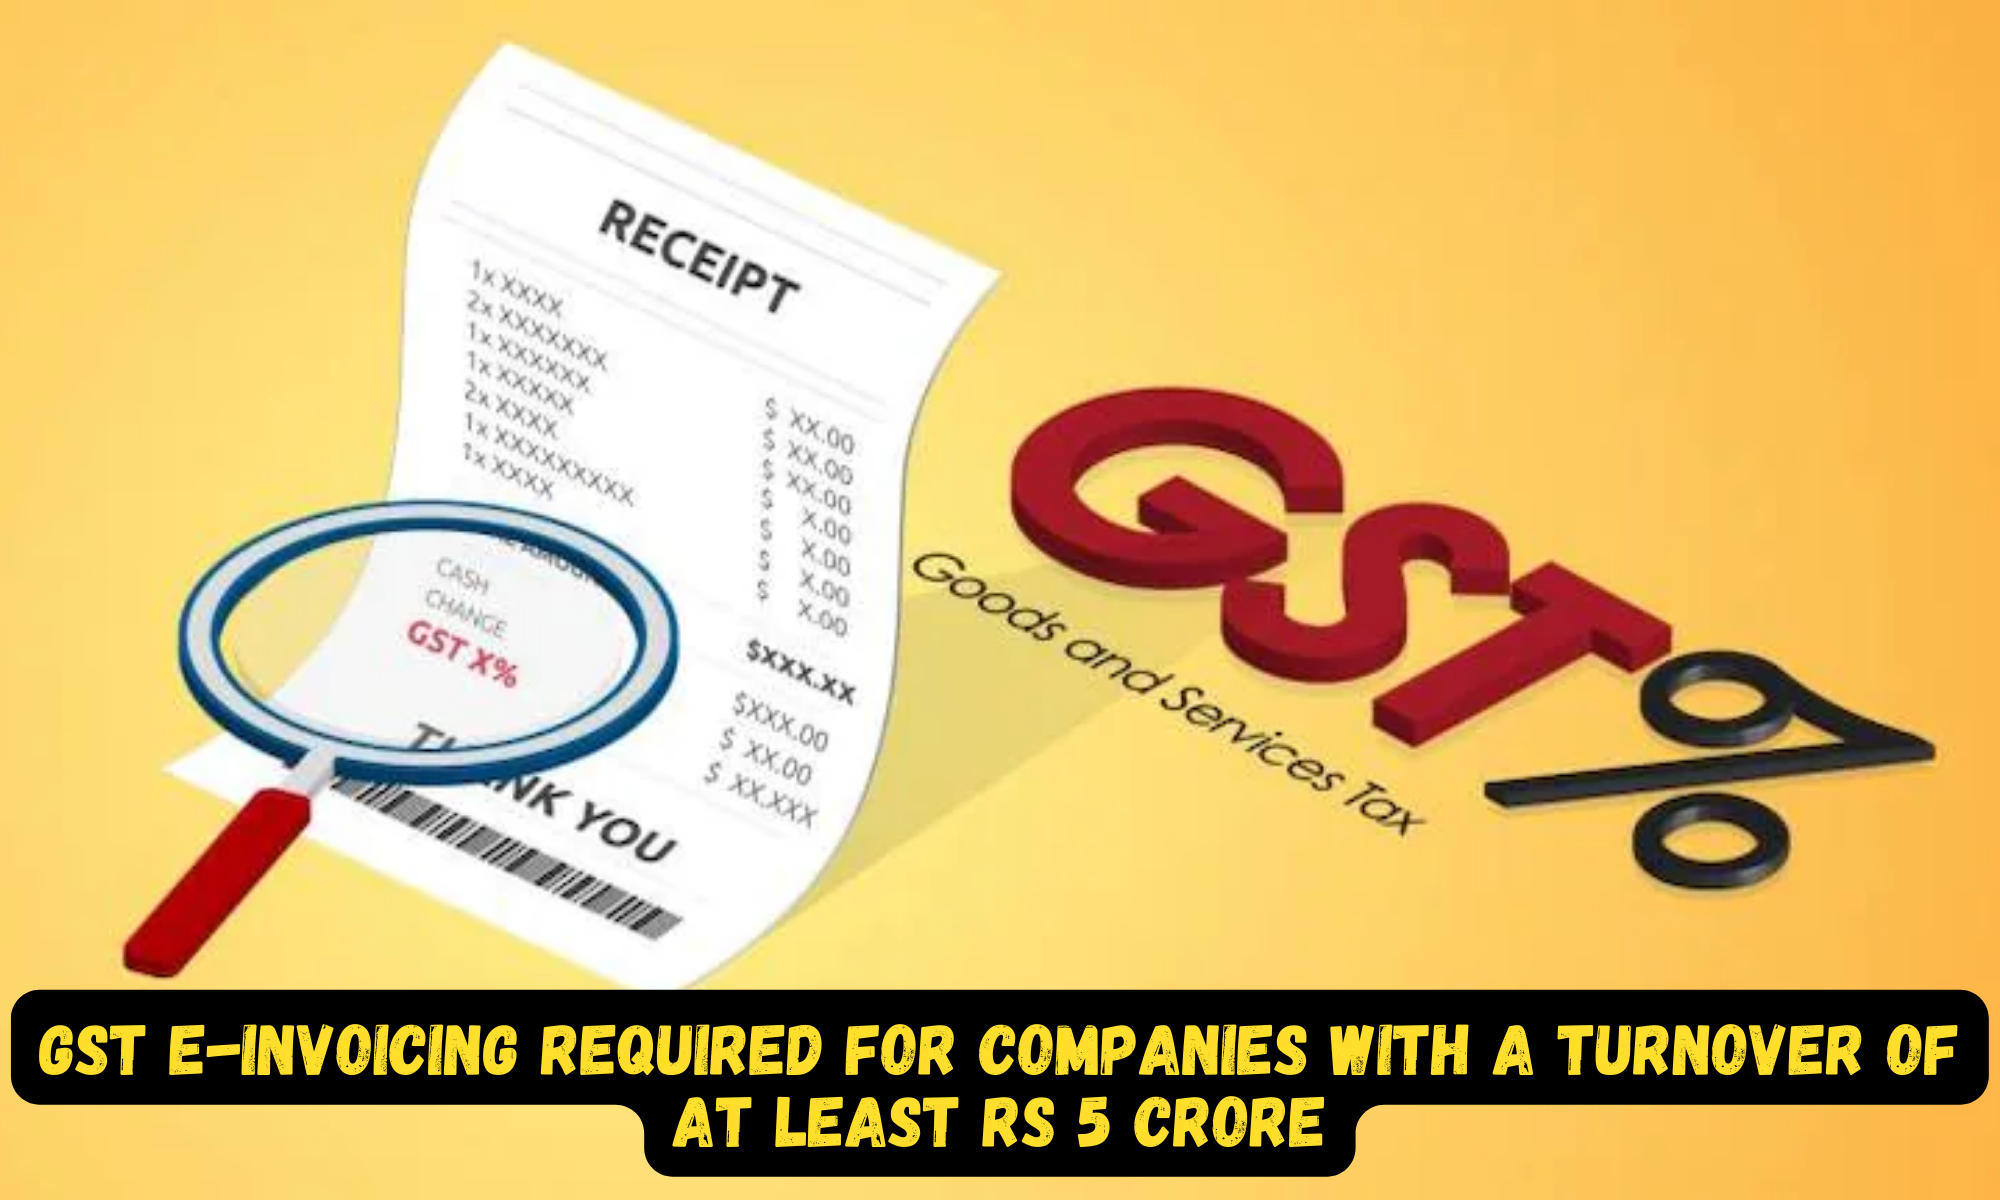 GST e-invoicing is required for companies with a turnover of at least Rs 5 crore_40.1